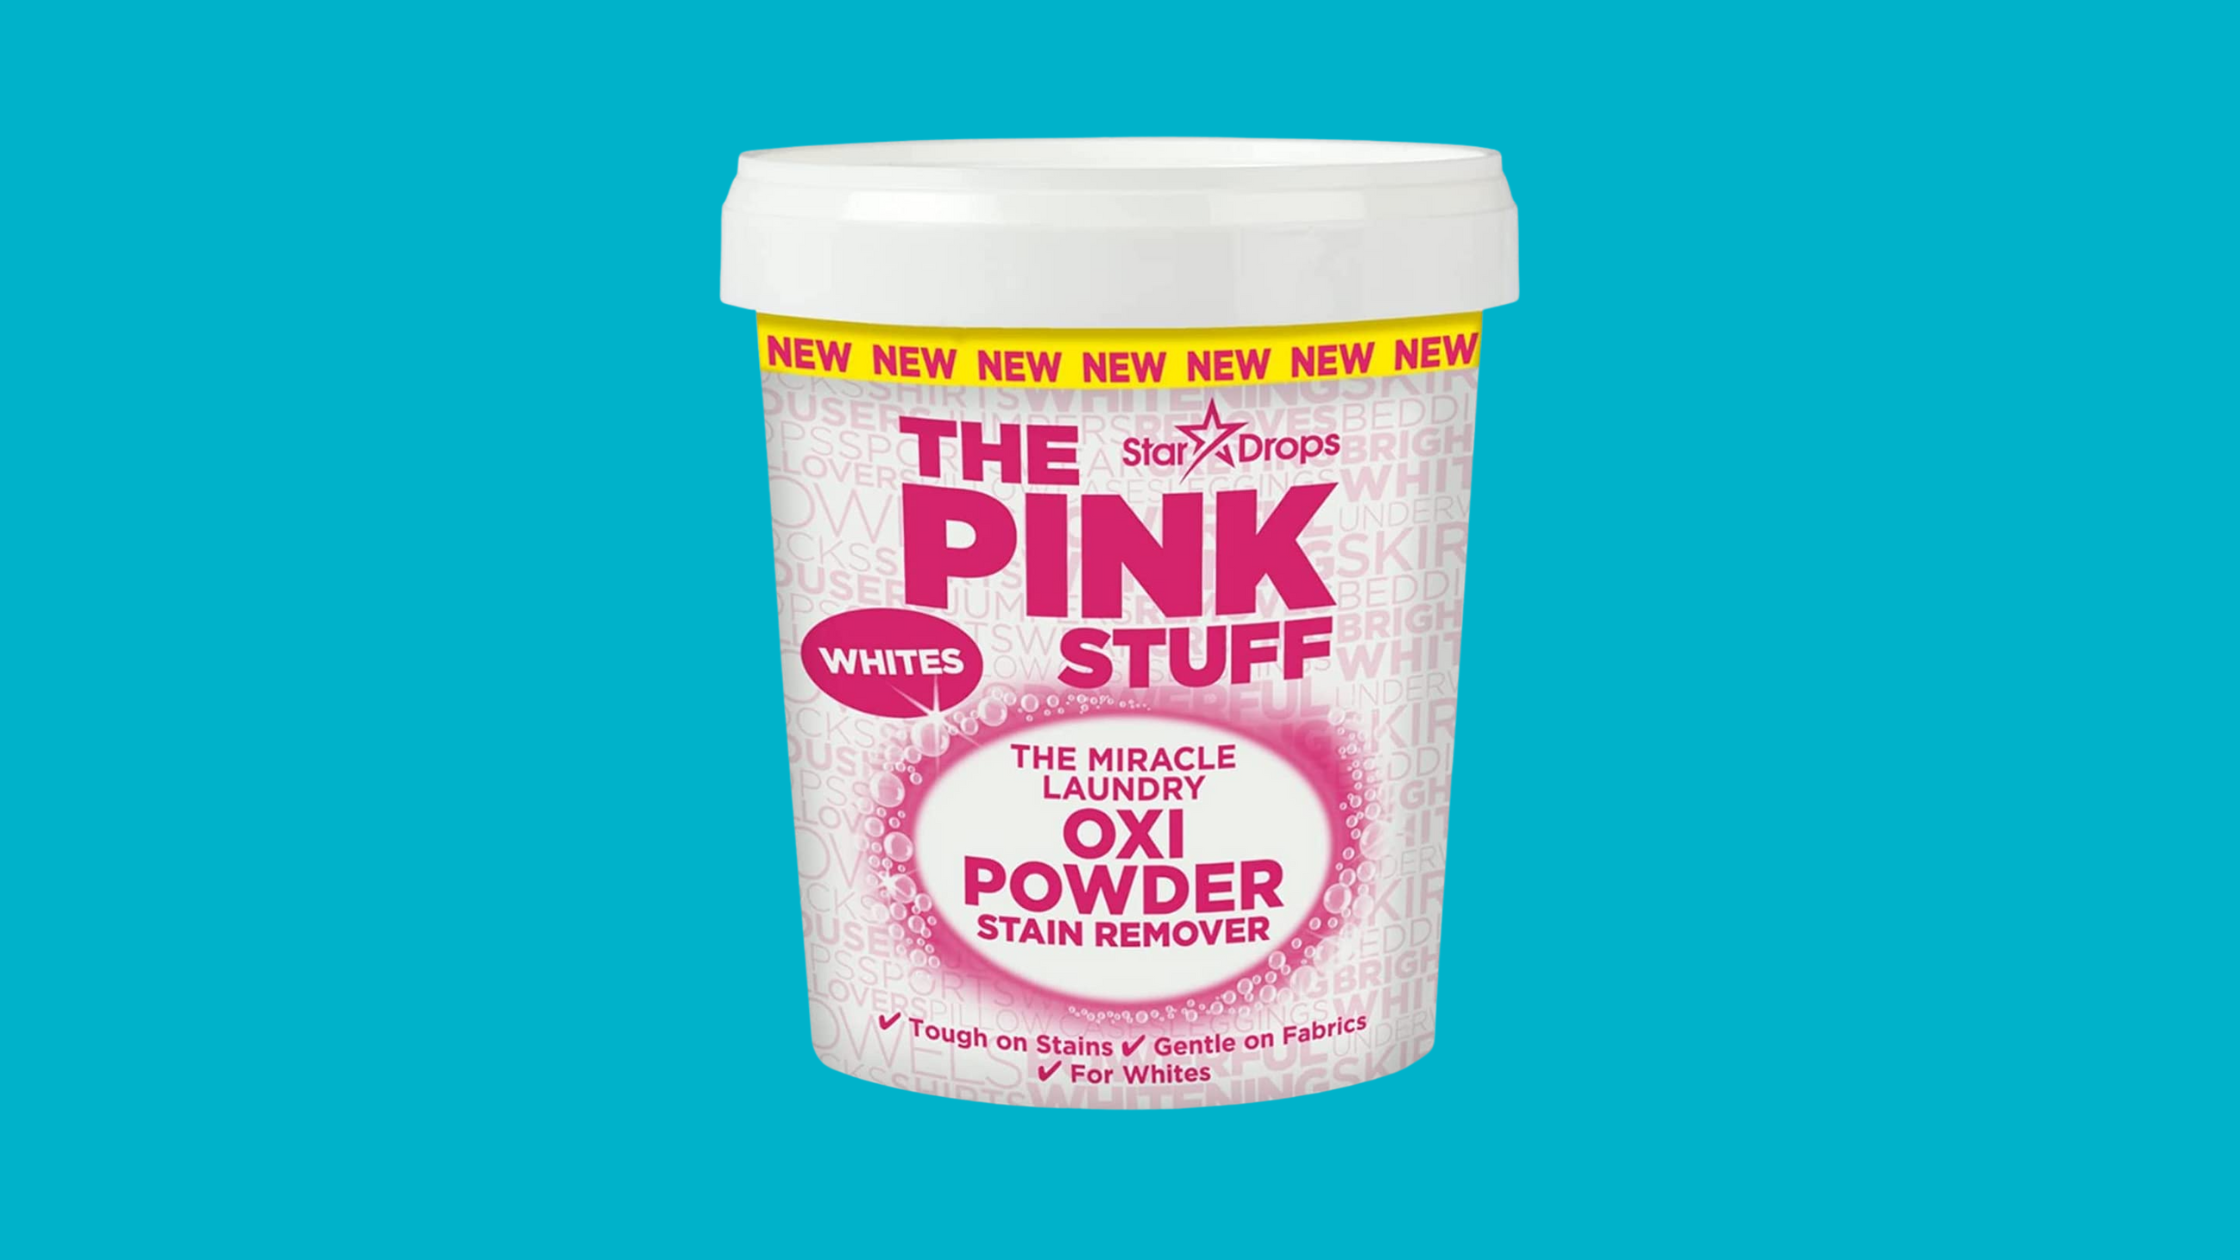 The Pink Stuff Stain Remover